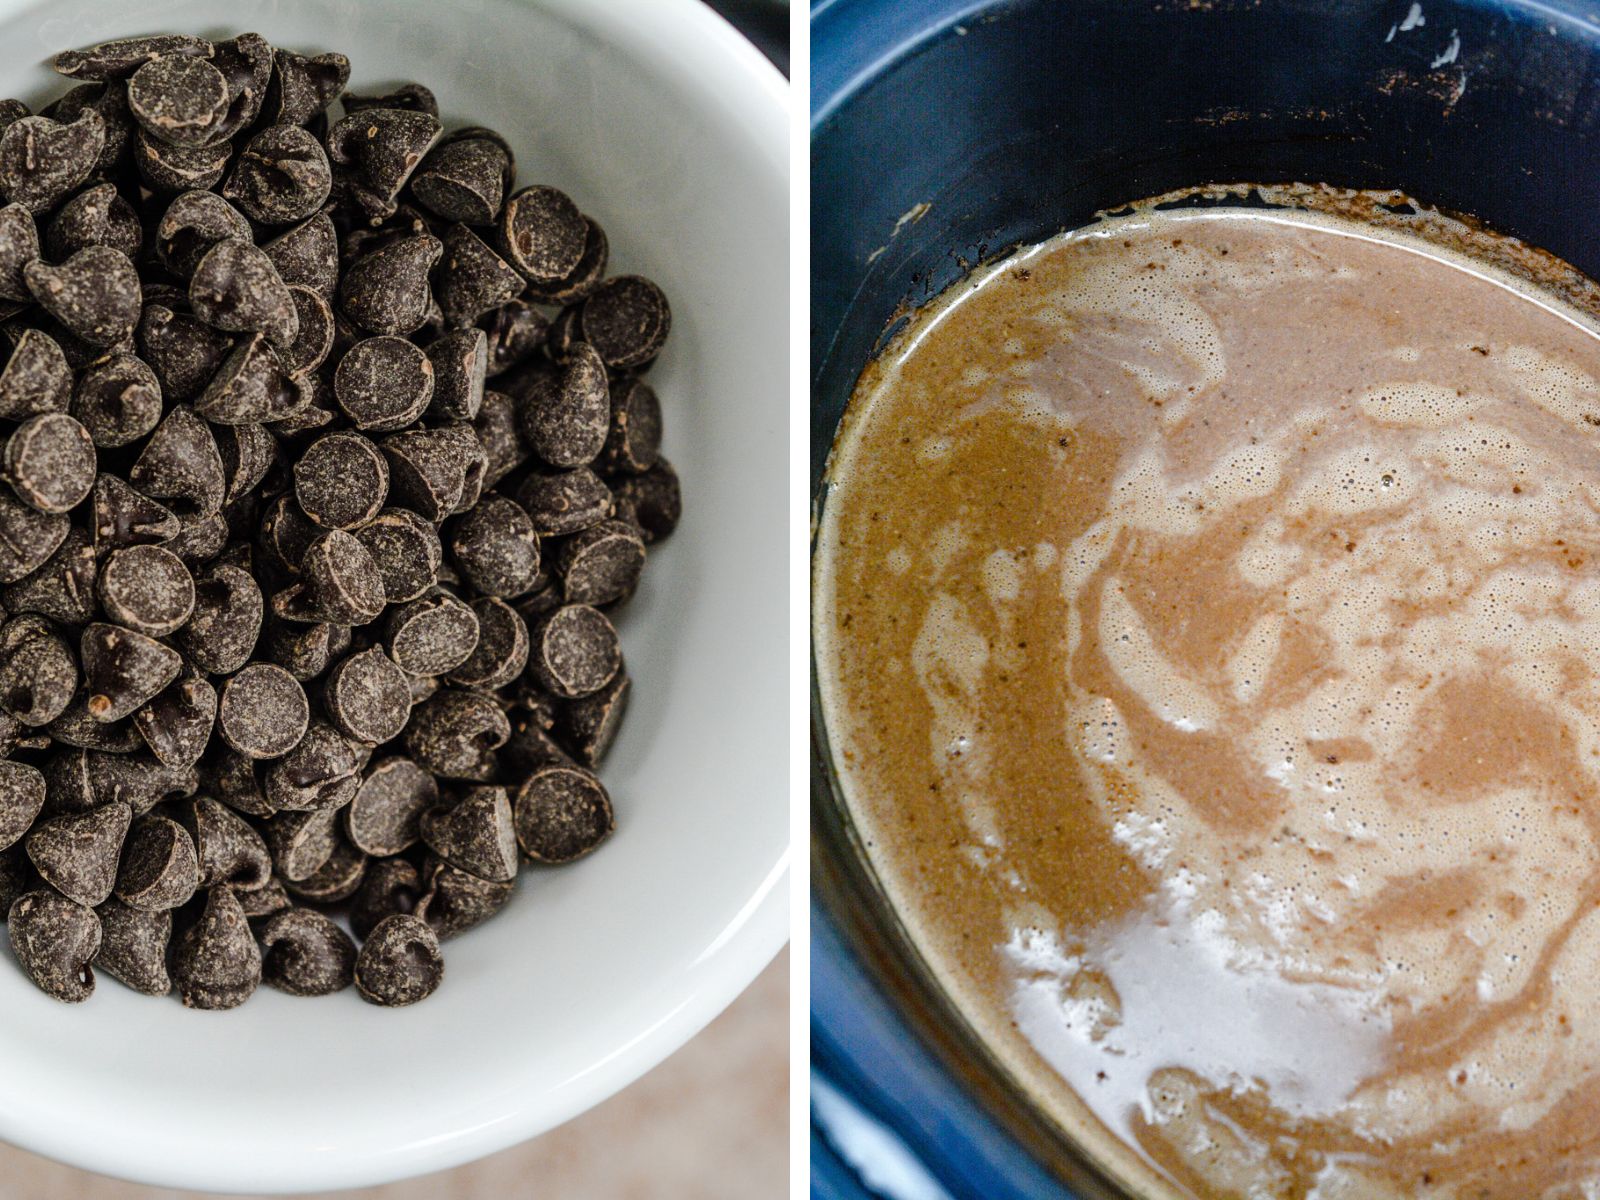 Collage image of chocolate chips in a white bowl and a black crockpot full of hot chocolate.